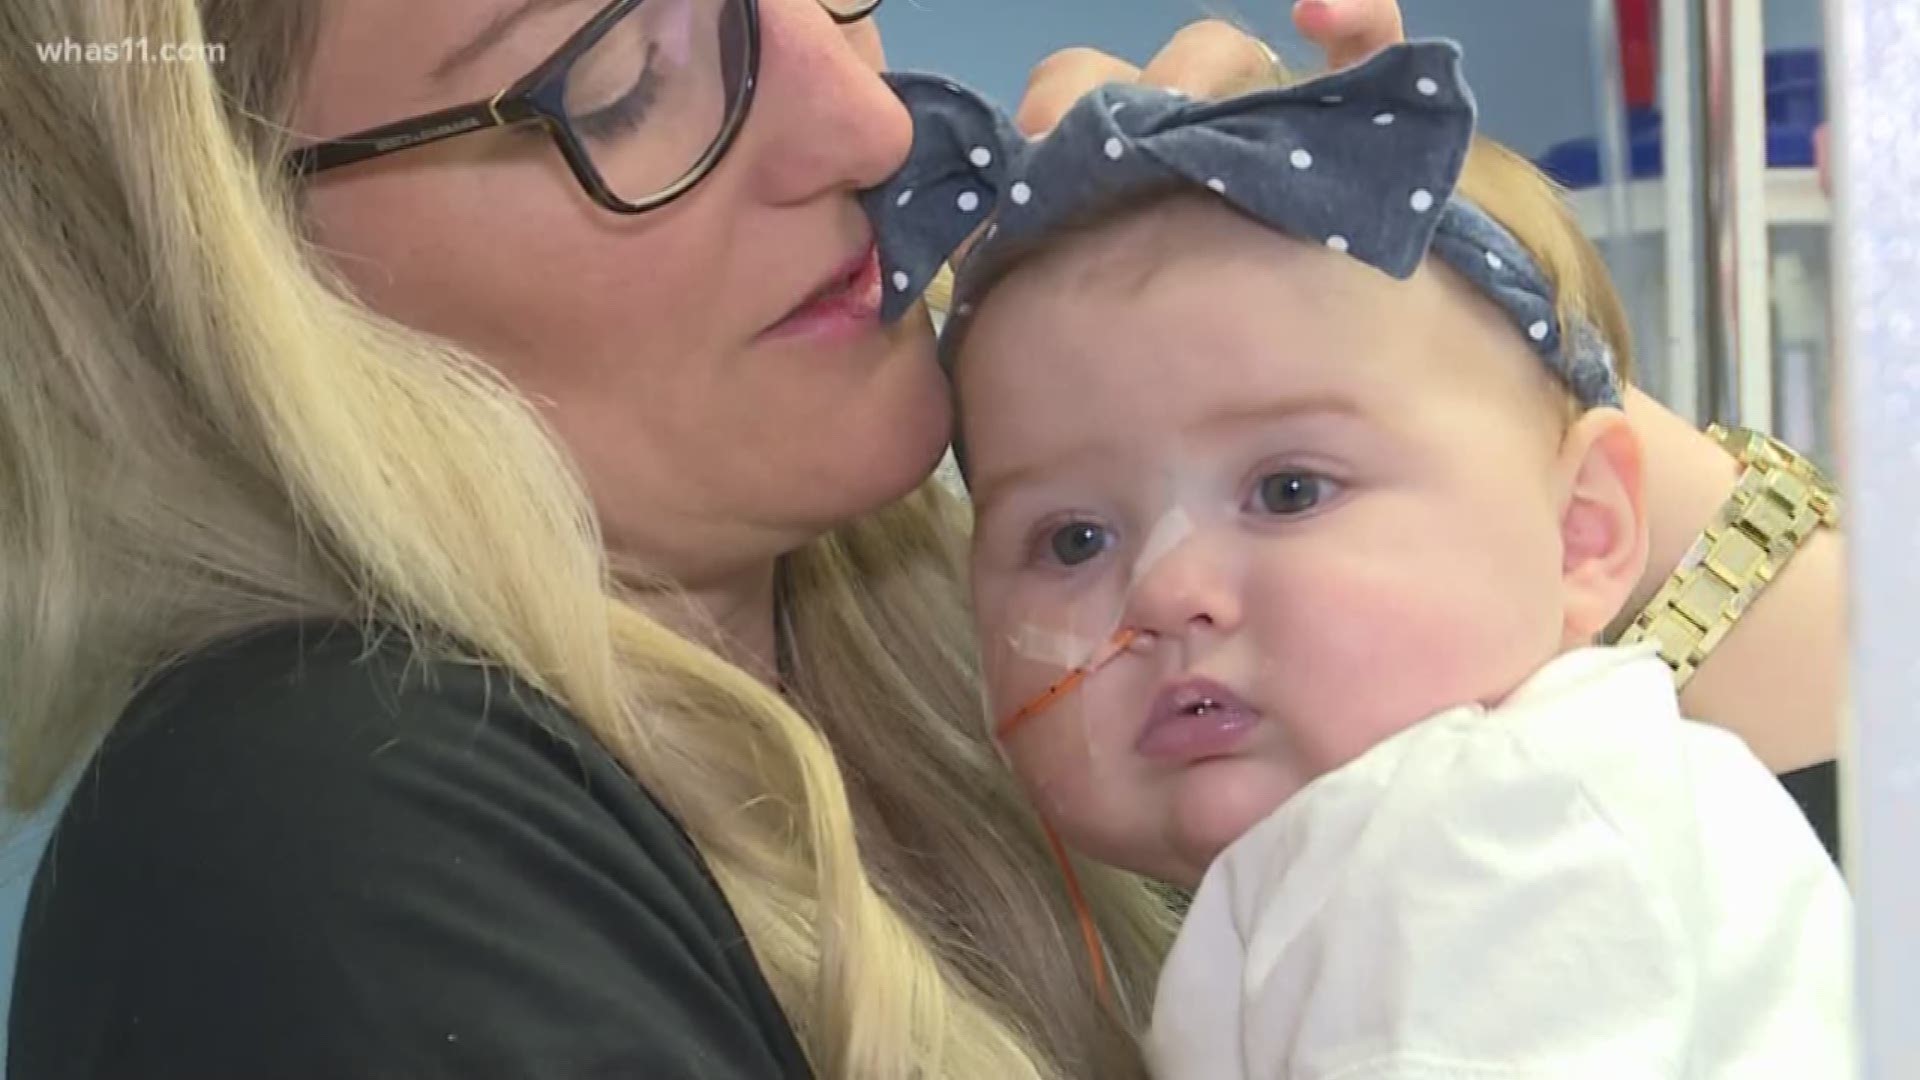 The fundraiser is on July 21 in honor of the 8-month-old who's waiting for a new heart.